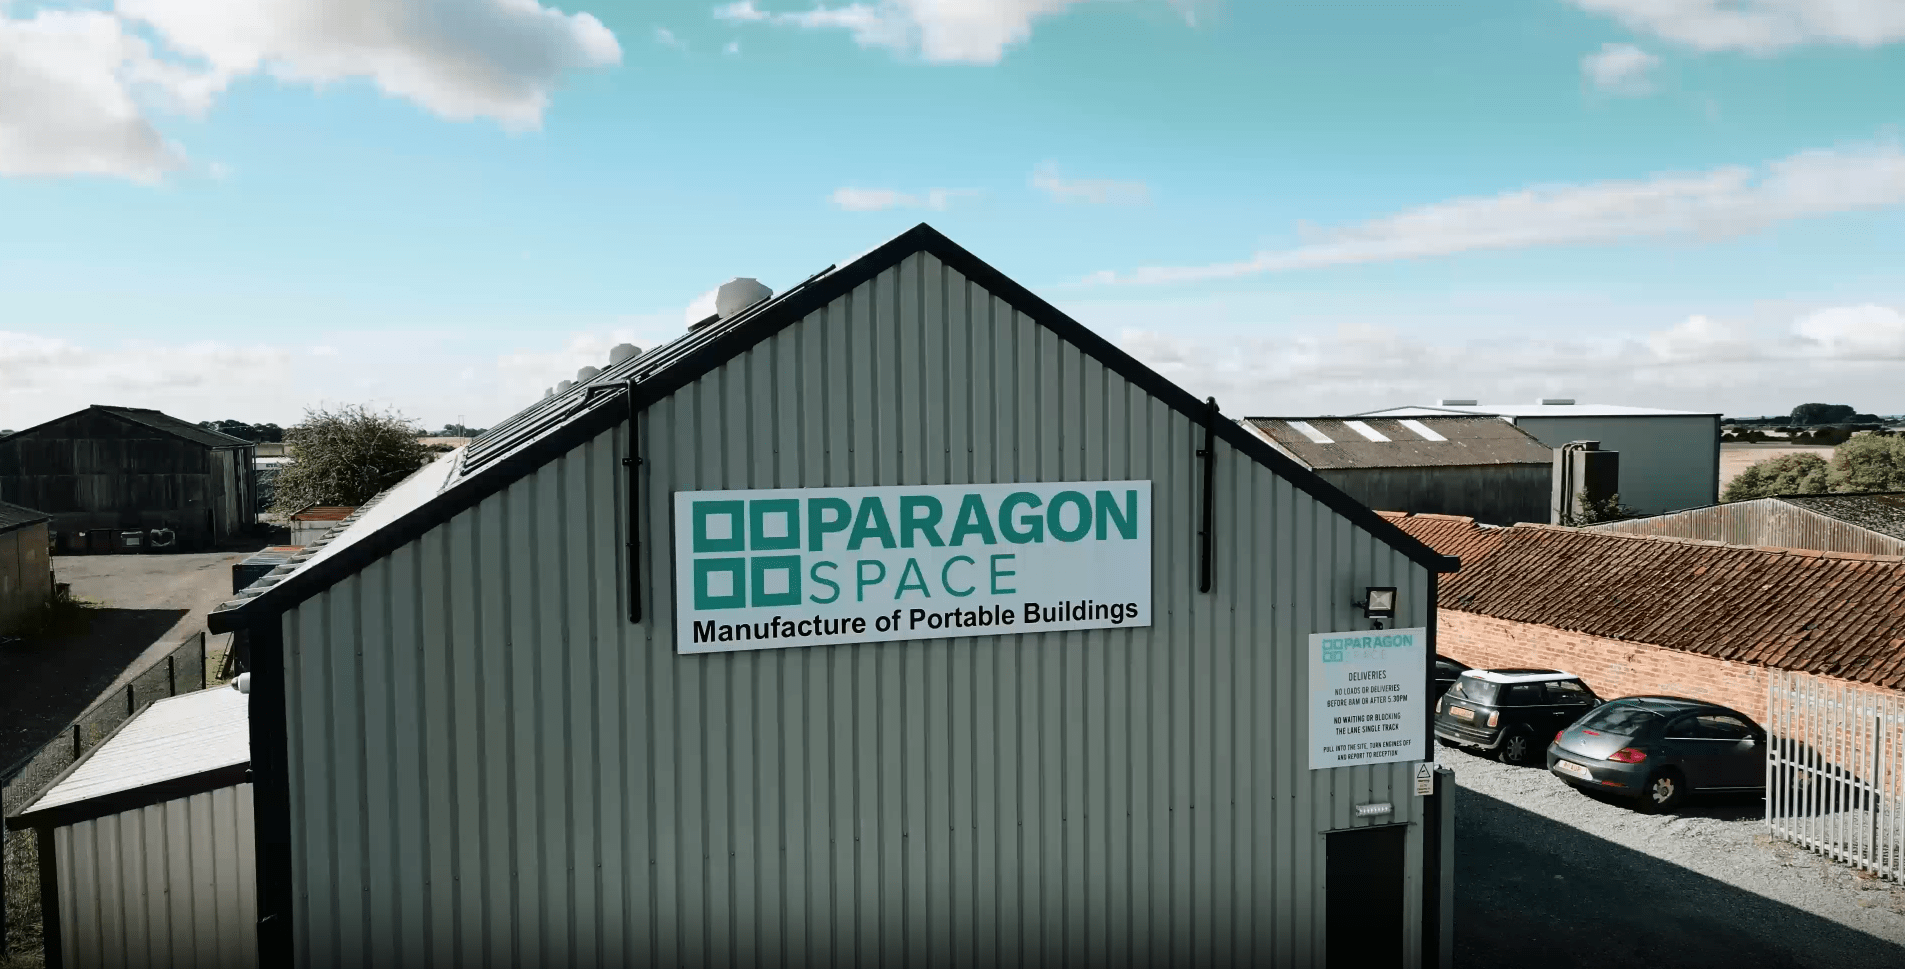 Paragon Space modular building manufacturing plant in Hull